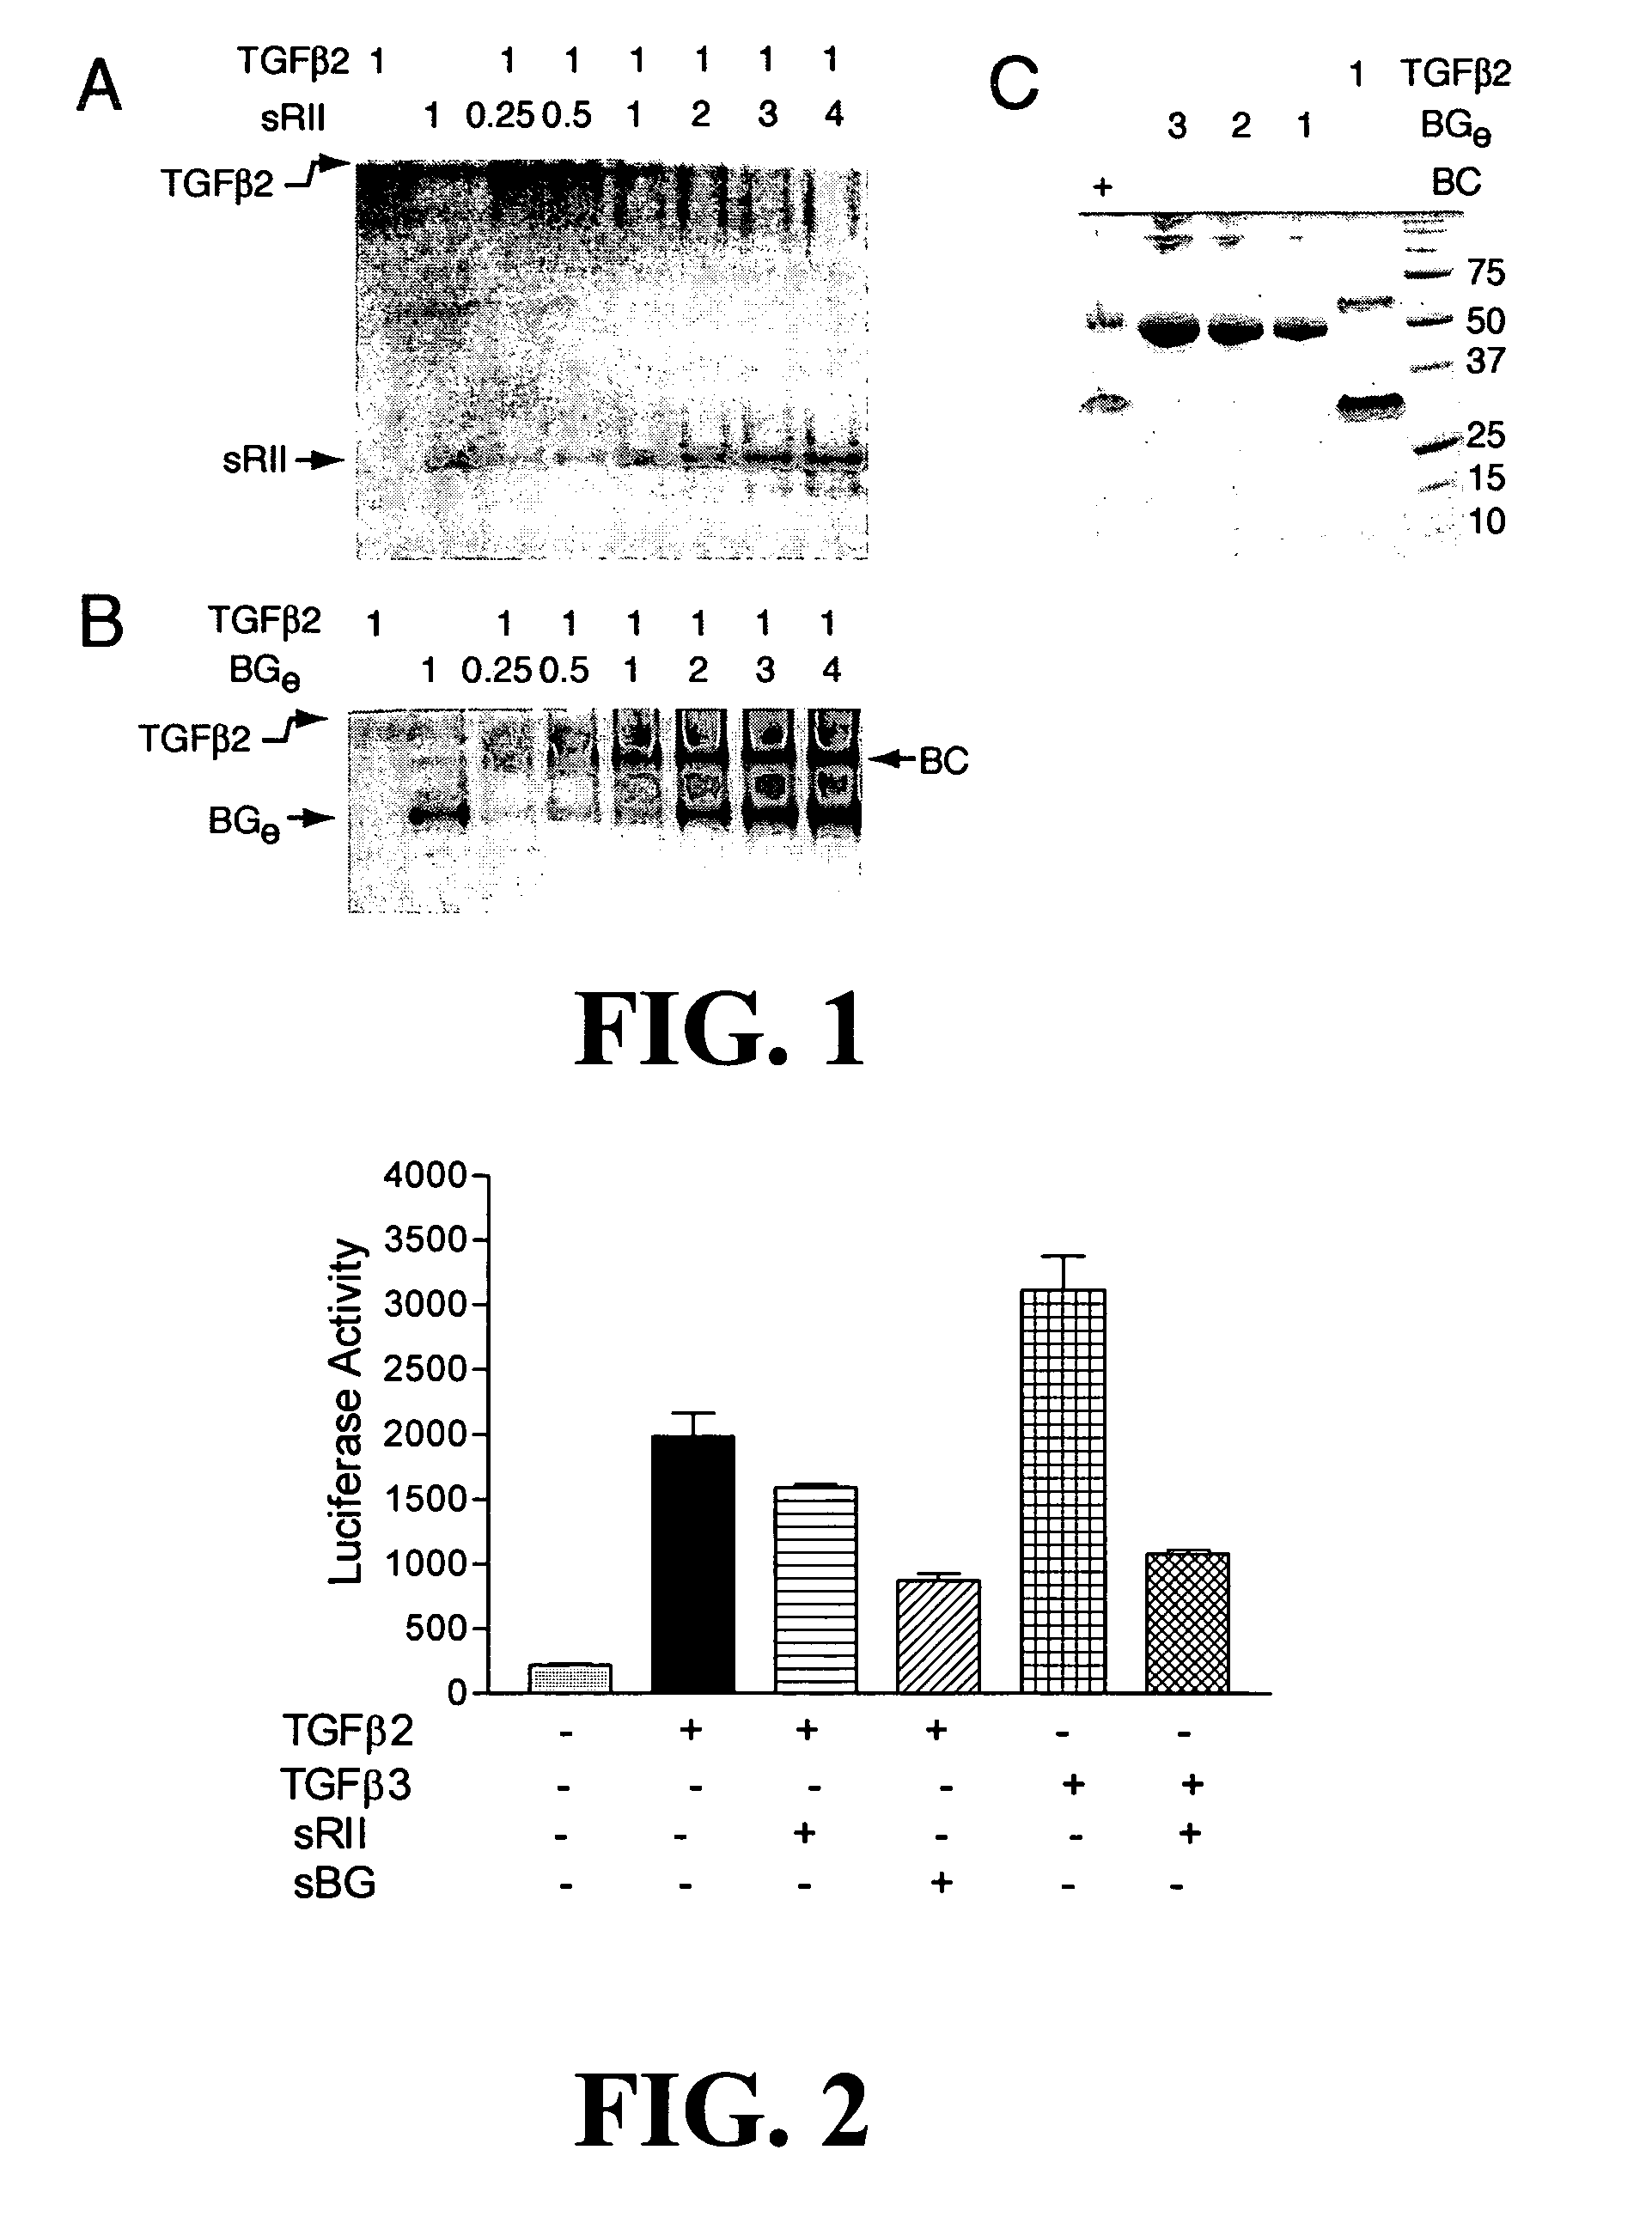 Antagonizing TGF-beta activity with various ectodomains TGF-beta receptors used in combination or as fusion proteins